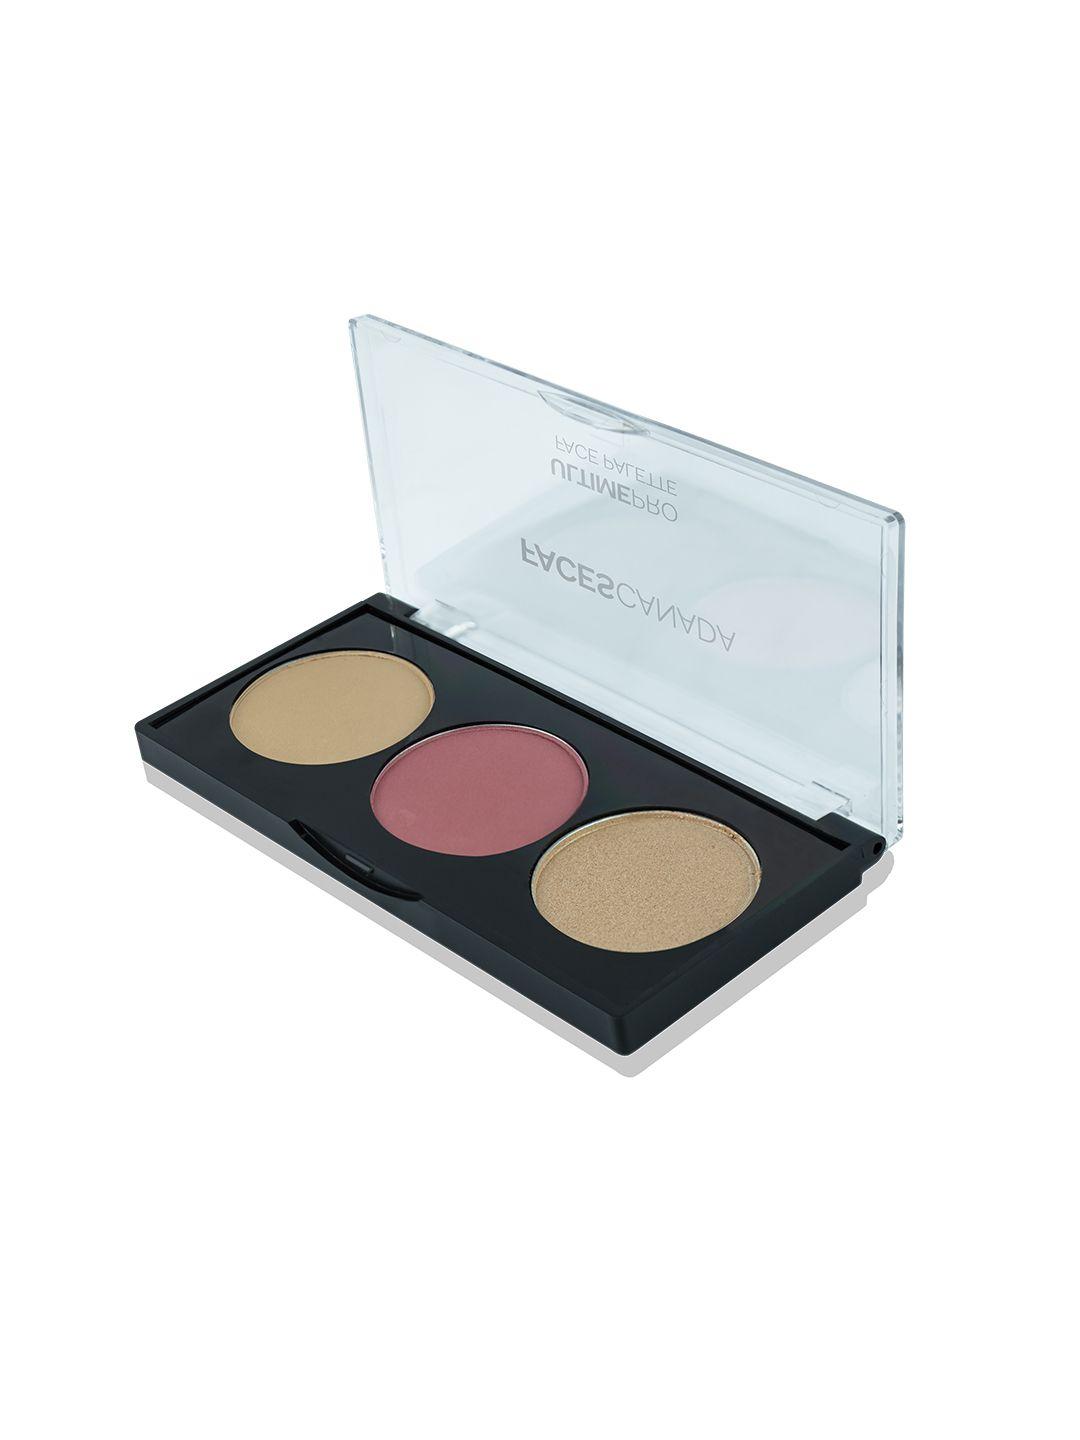 faces canada ultimepro lightweight face palette 12g - rise 03